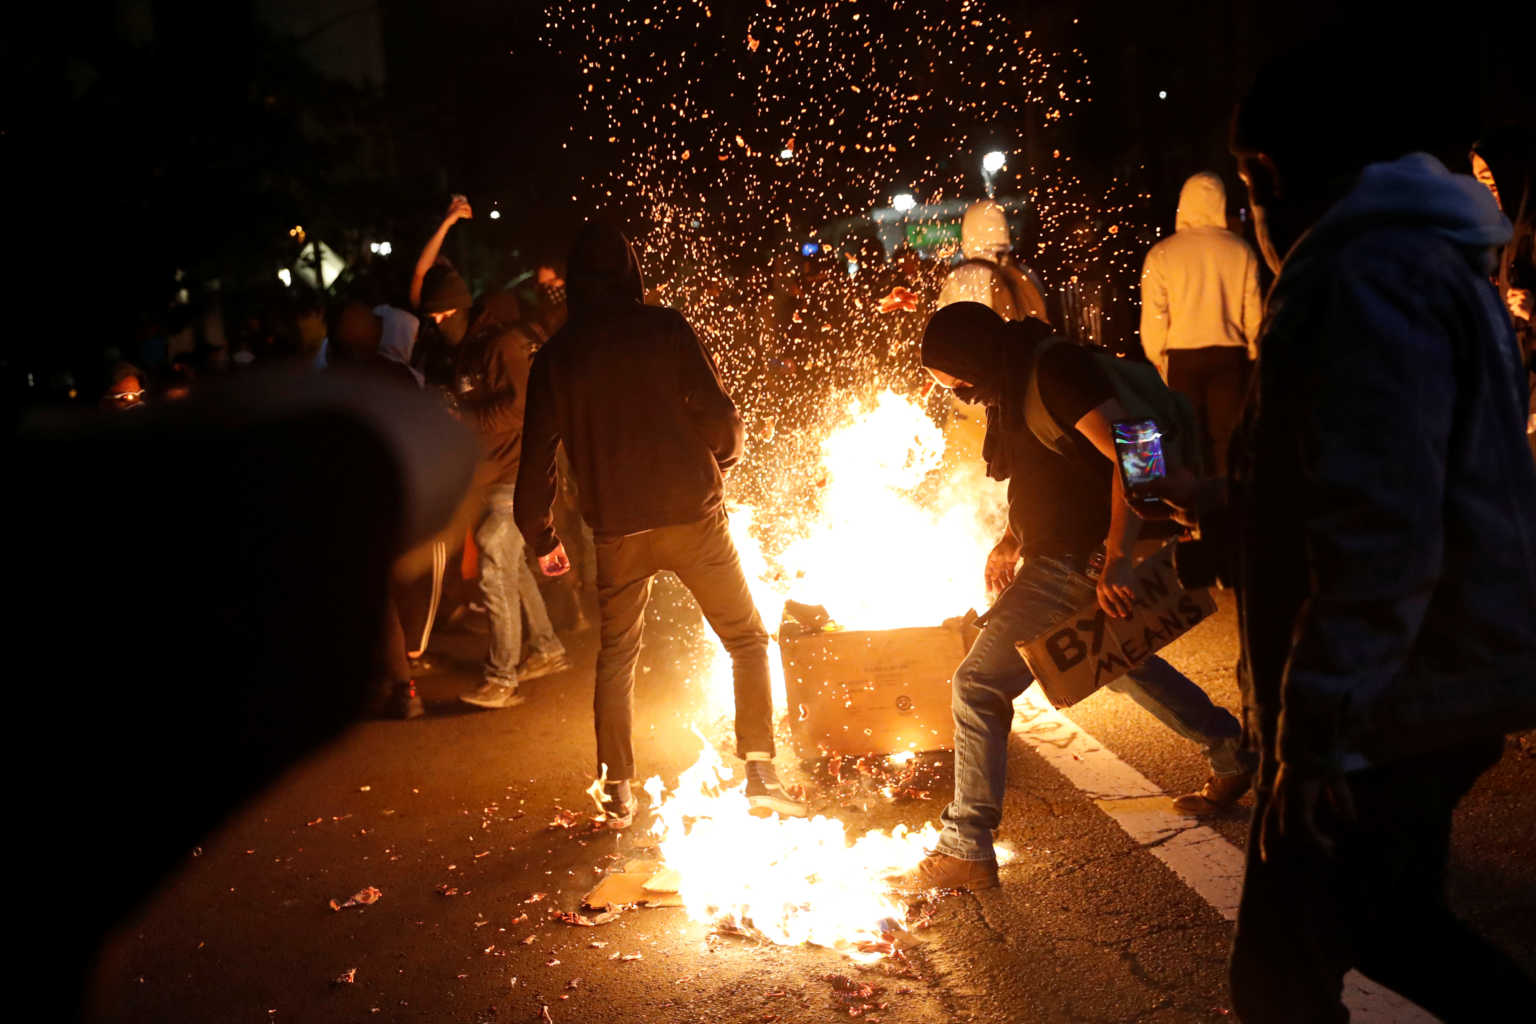 Demonstrators attempt to extinguish a trash fire during a protest against the death of African-American man George Floyd under Minneapolis police custody, in Oakland, California, U.S. May 29, 2020. REUTERS/Stephen Lam